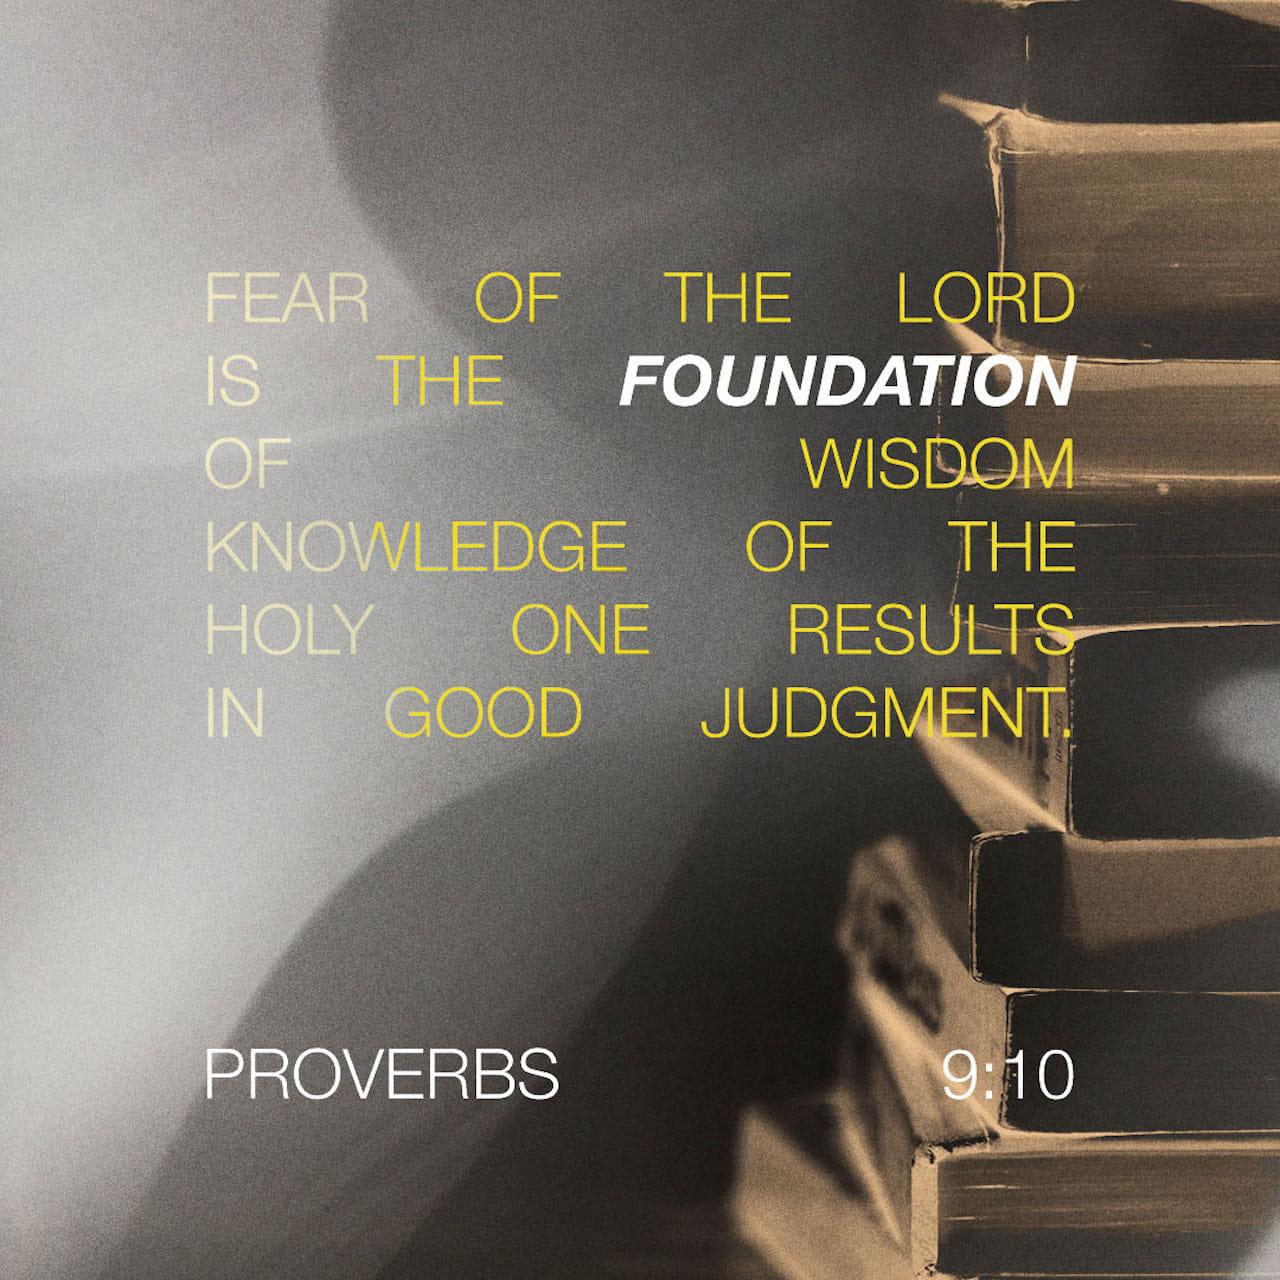 Bible Verse of the Day - day 91 - image 81662 (Proverbs 9:1-18)